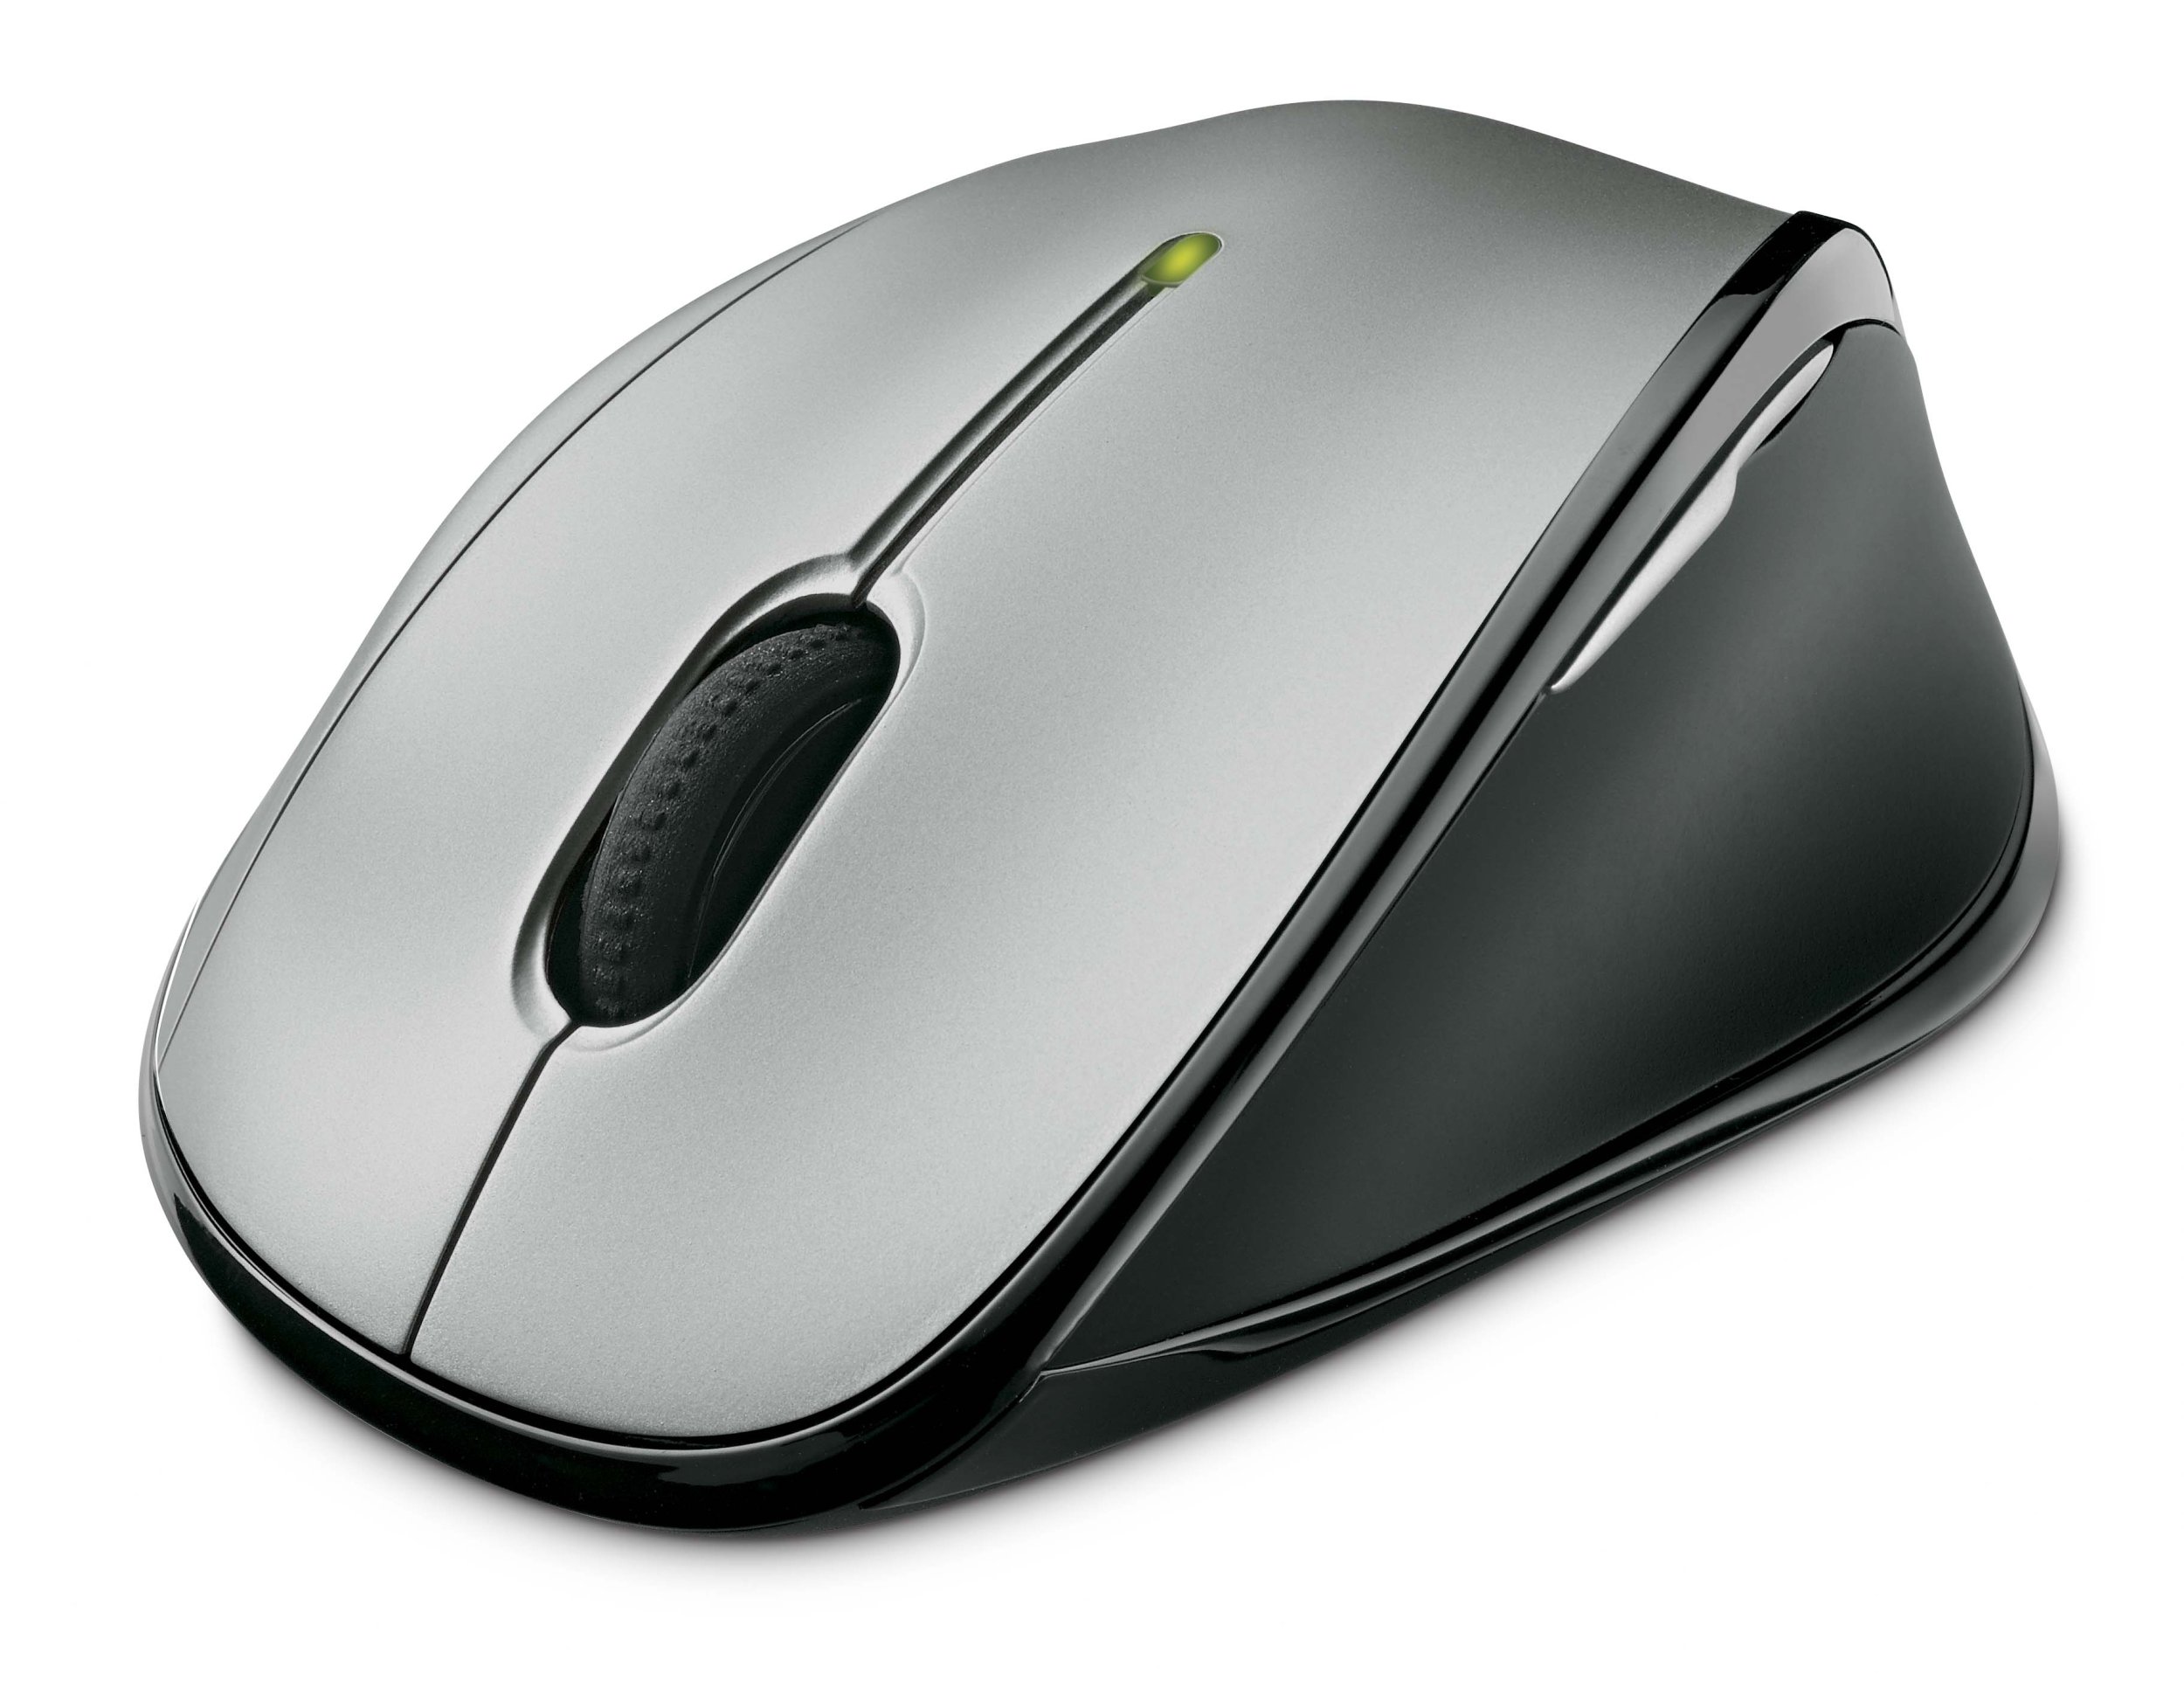 microsoft wireless mouse 6000 for mac